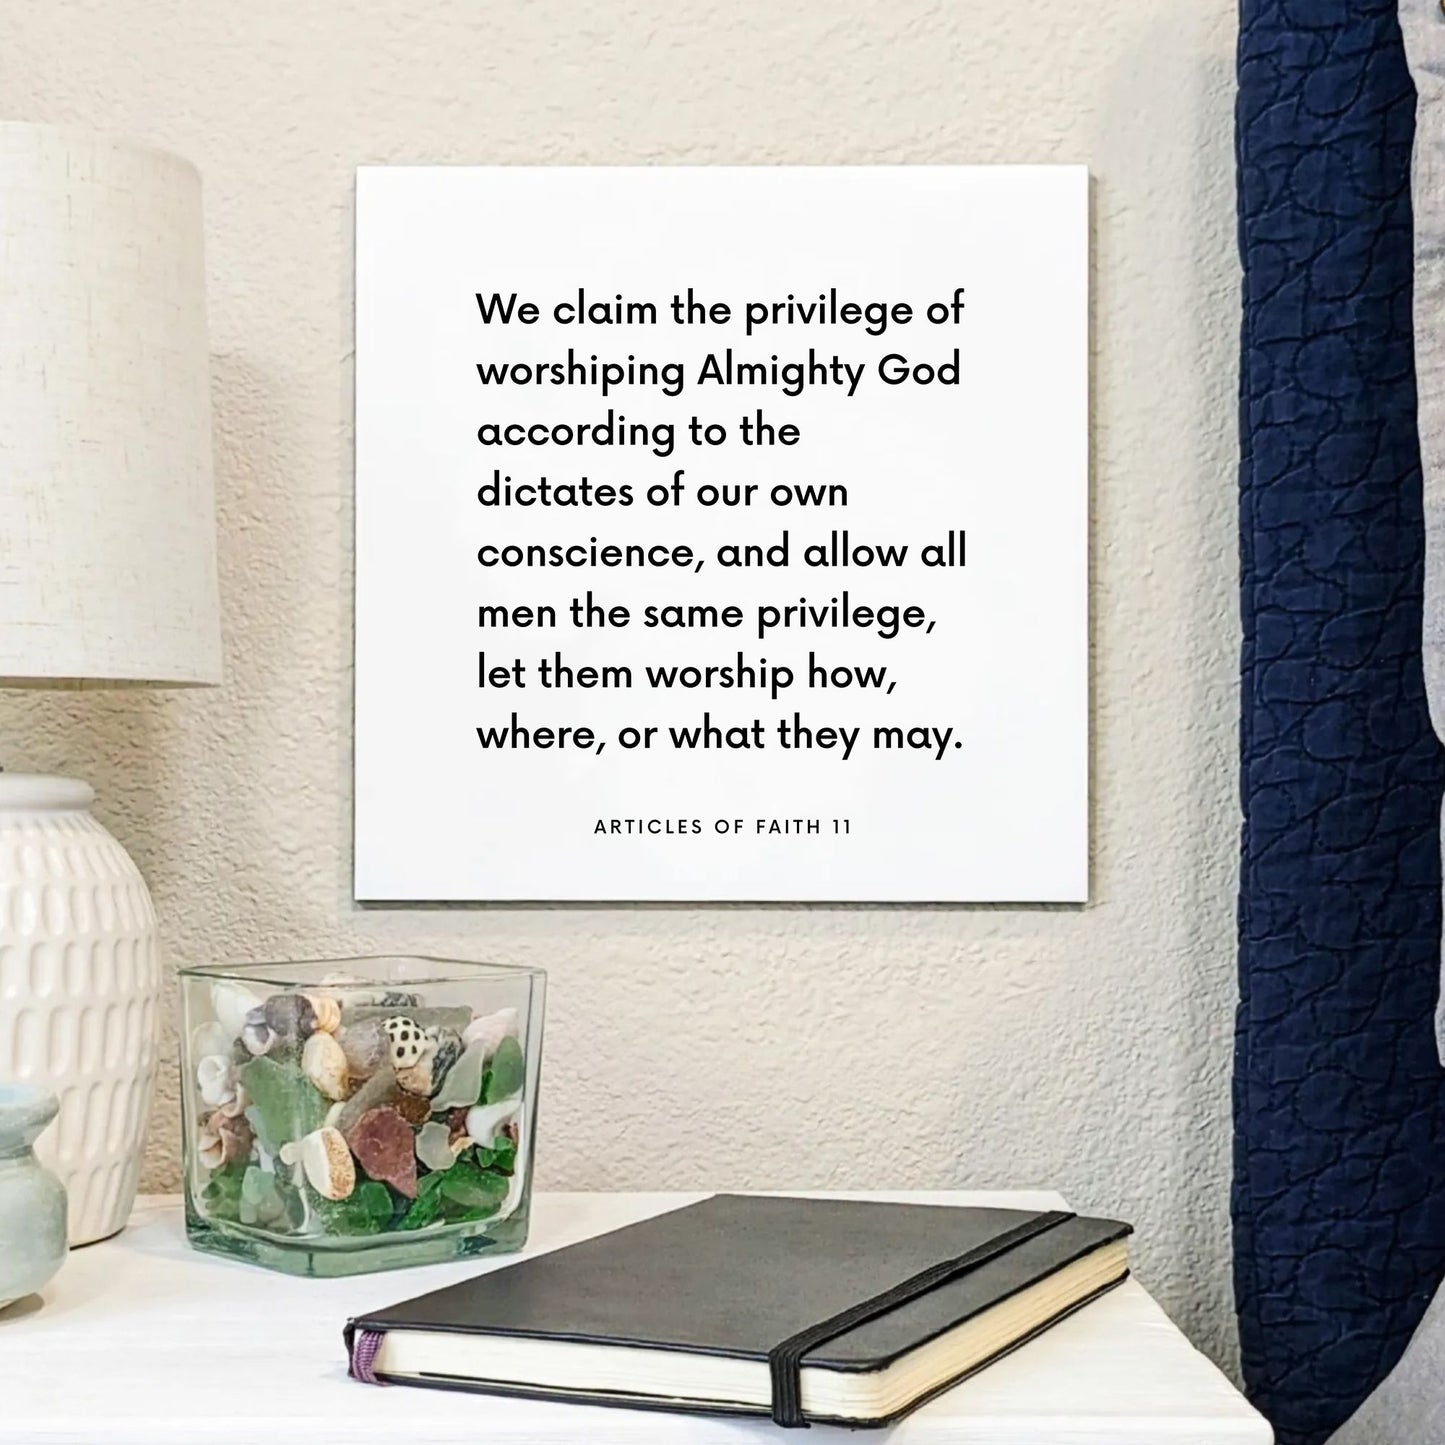 Bedside mouting of the scripture tile for Articles of Faith 11 - "We claim the privilege of worshiping Almighty God"